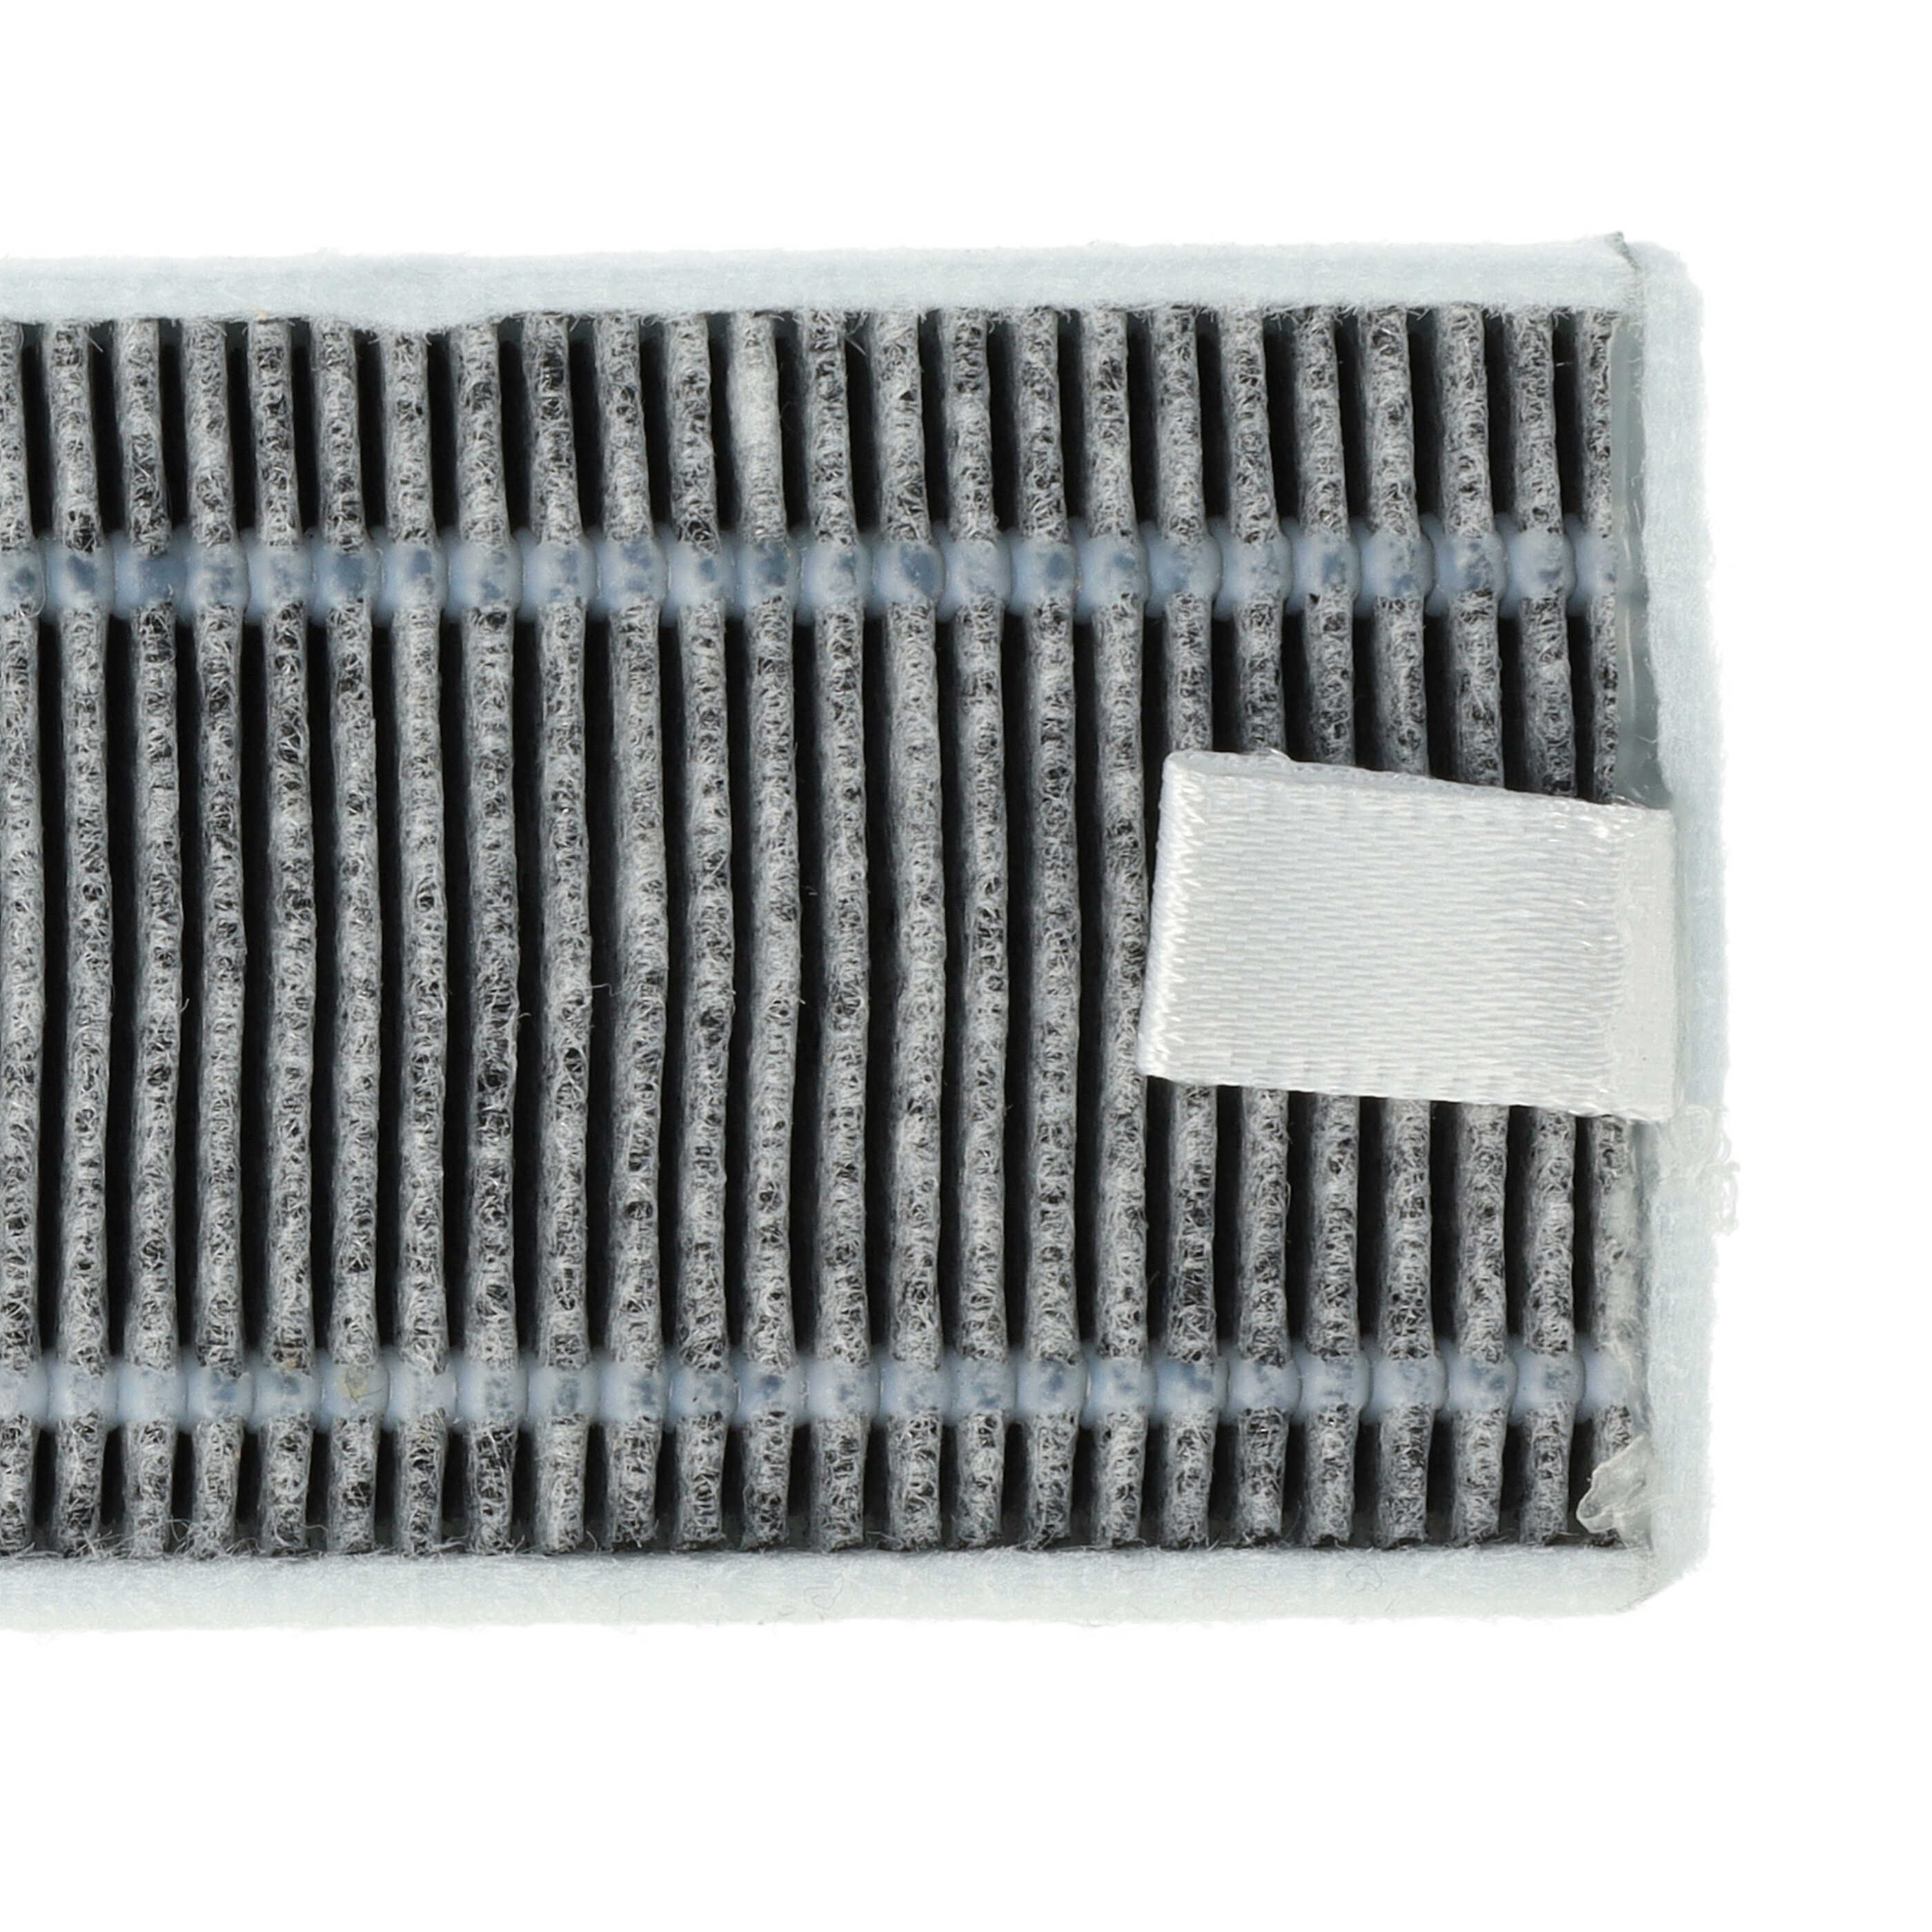 5x Active Carbon Filter suitable for M7 Proscenic, Cecotec, Xiaomi M7 Robot and Others - 13 x 4 x 1 cm